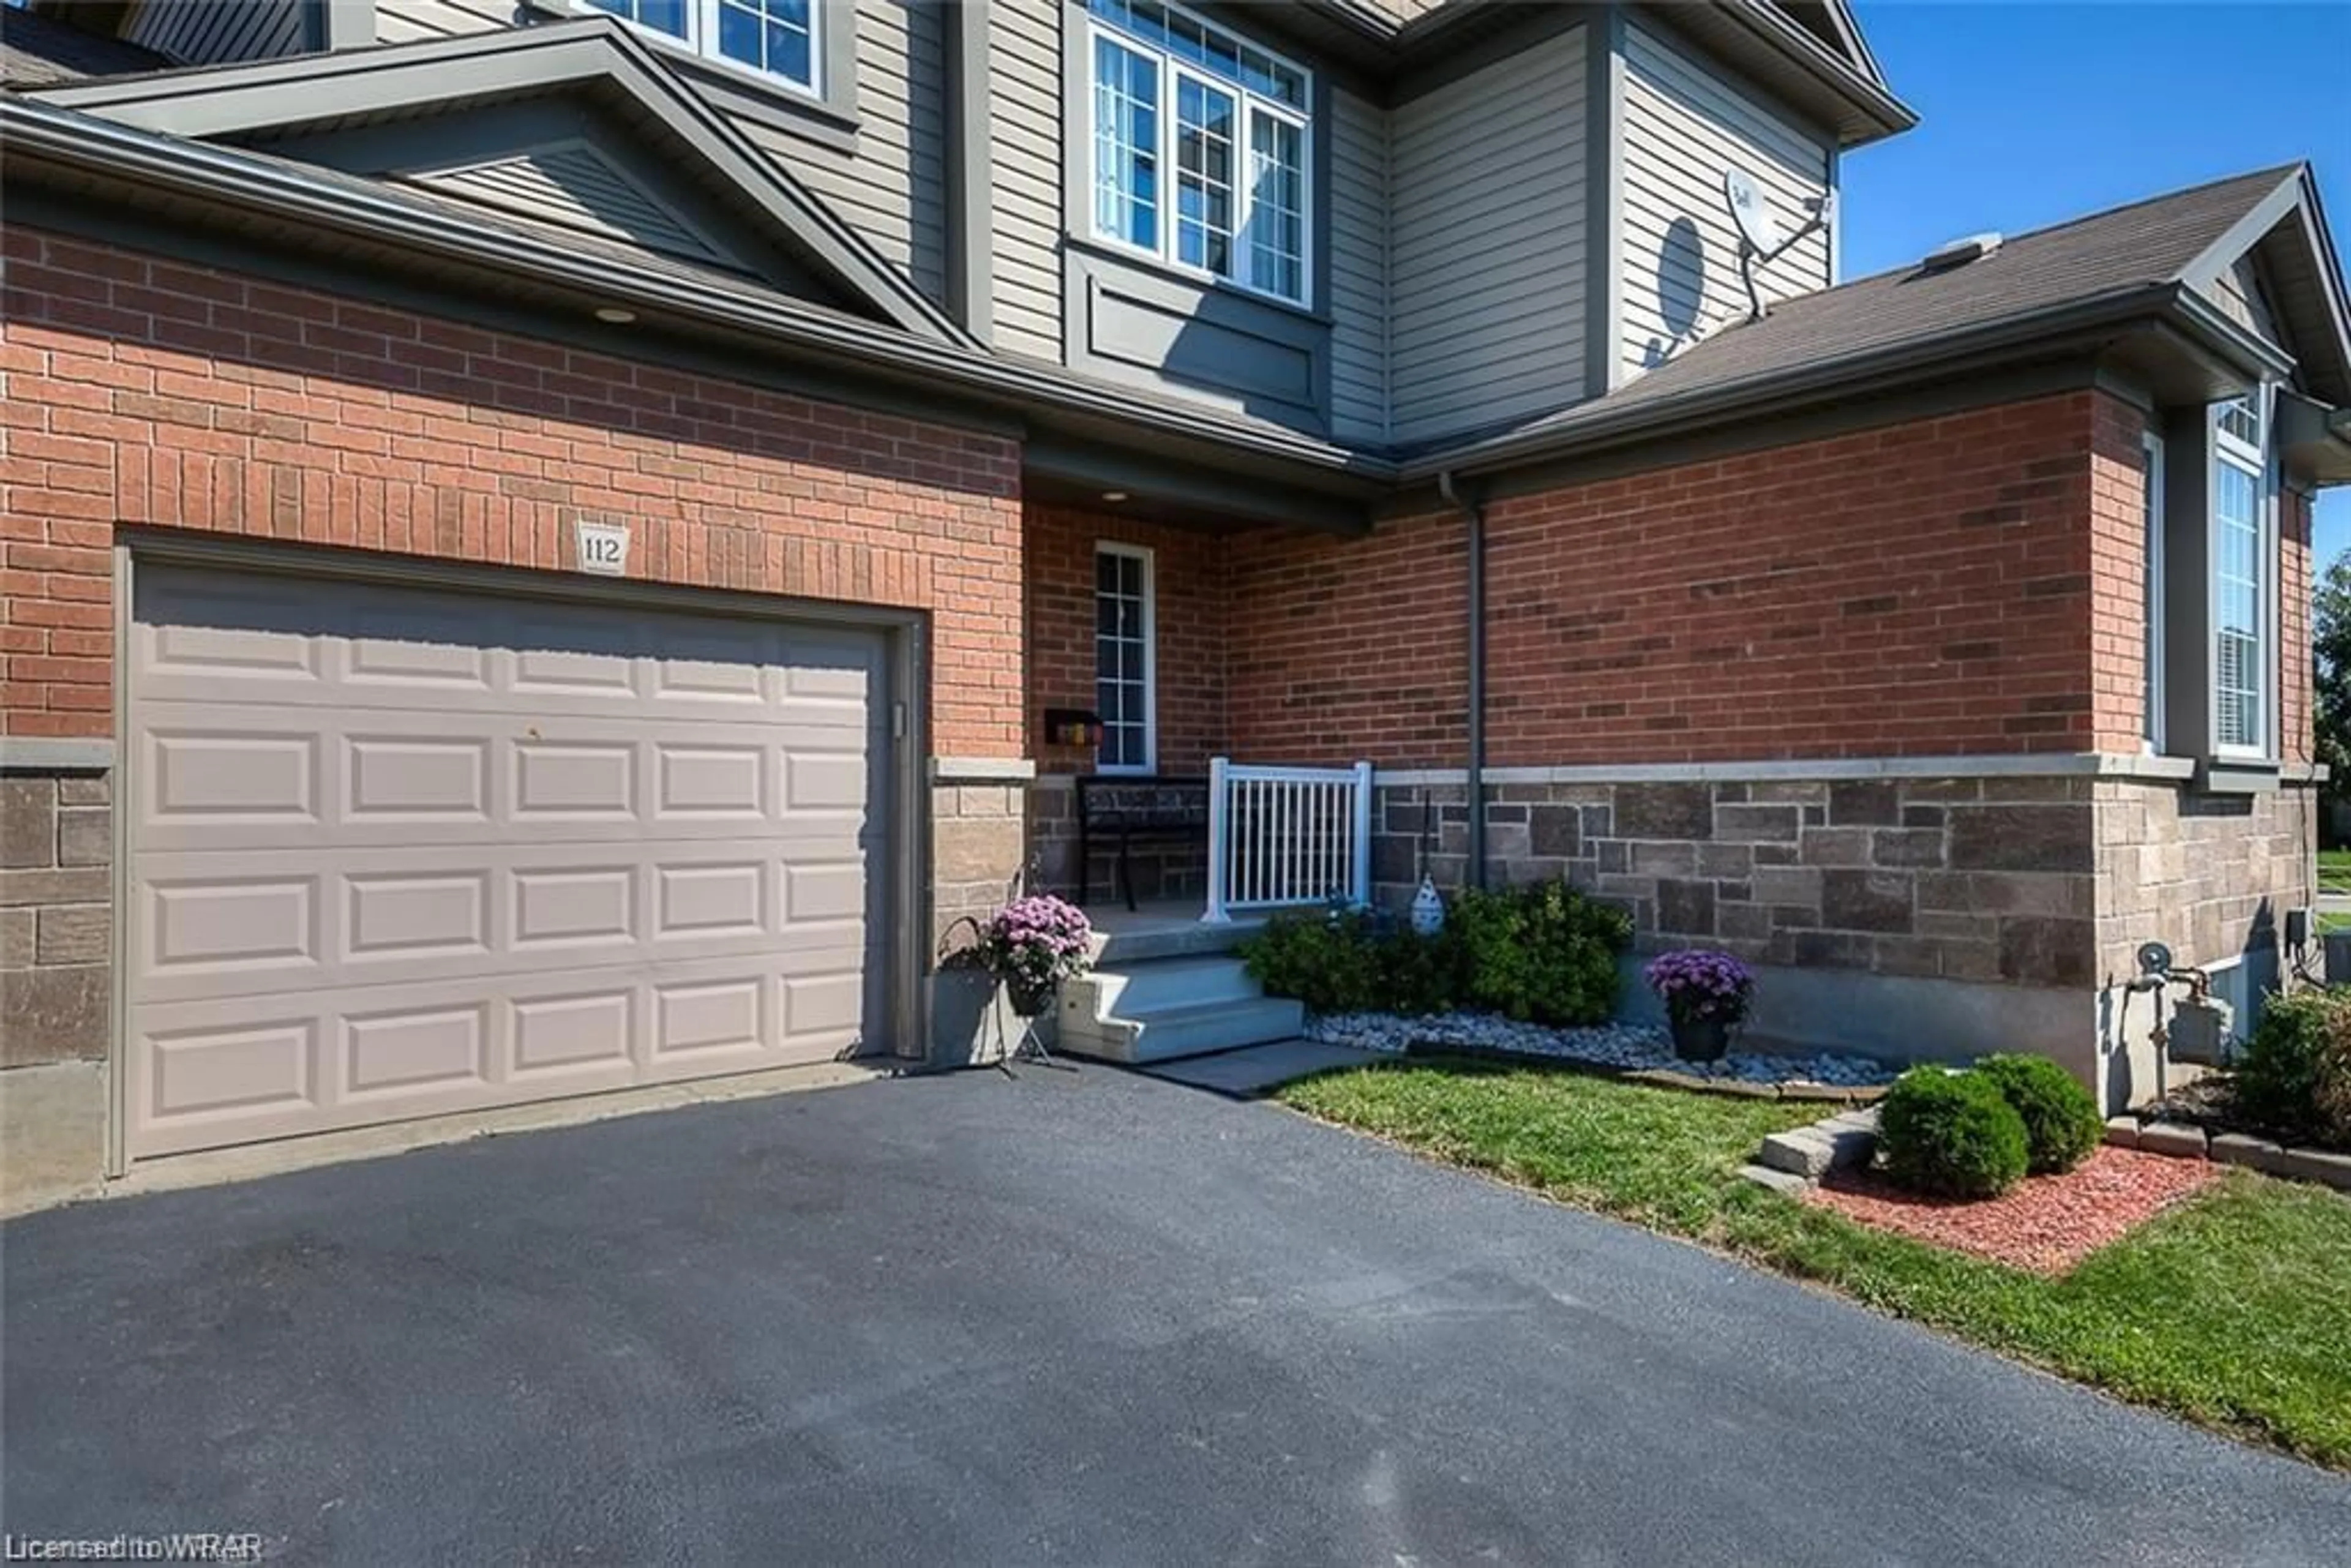 Home with brick exterior material for 112 Oakcliffe St, Elmira Ontario N3B 3L9